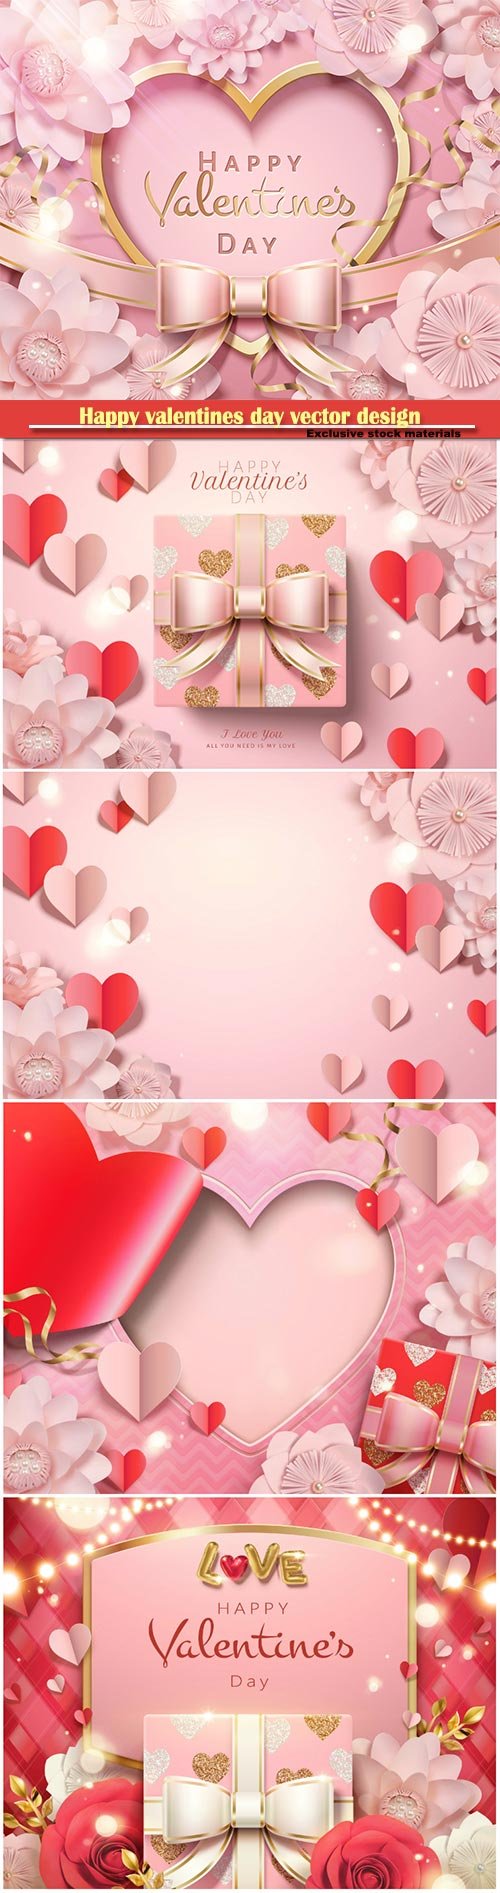 Happy valentines day vector design with heart, balloons, roses in 3d illustration # 5